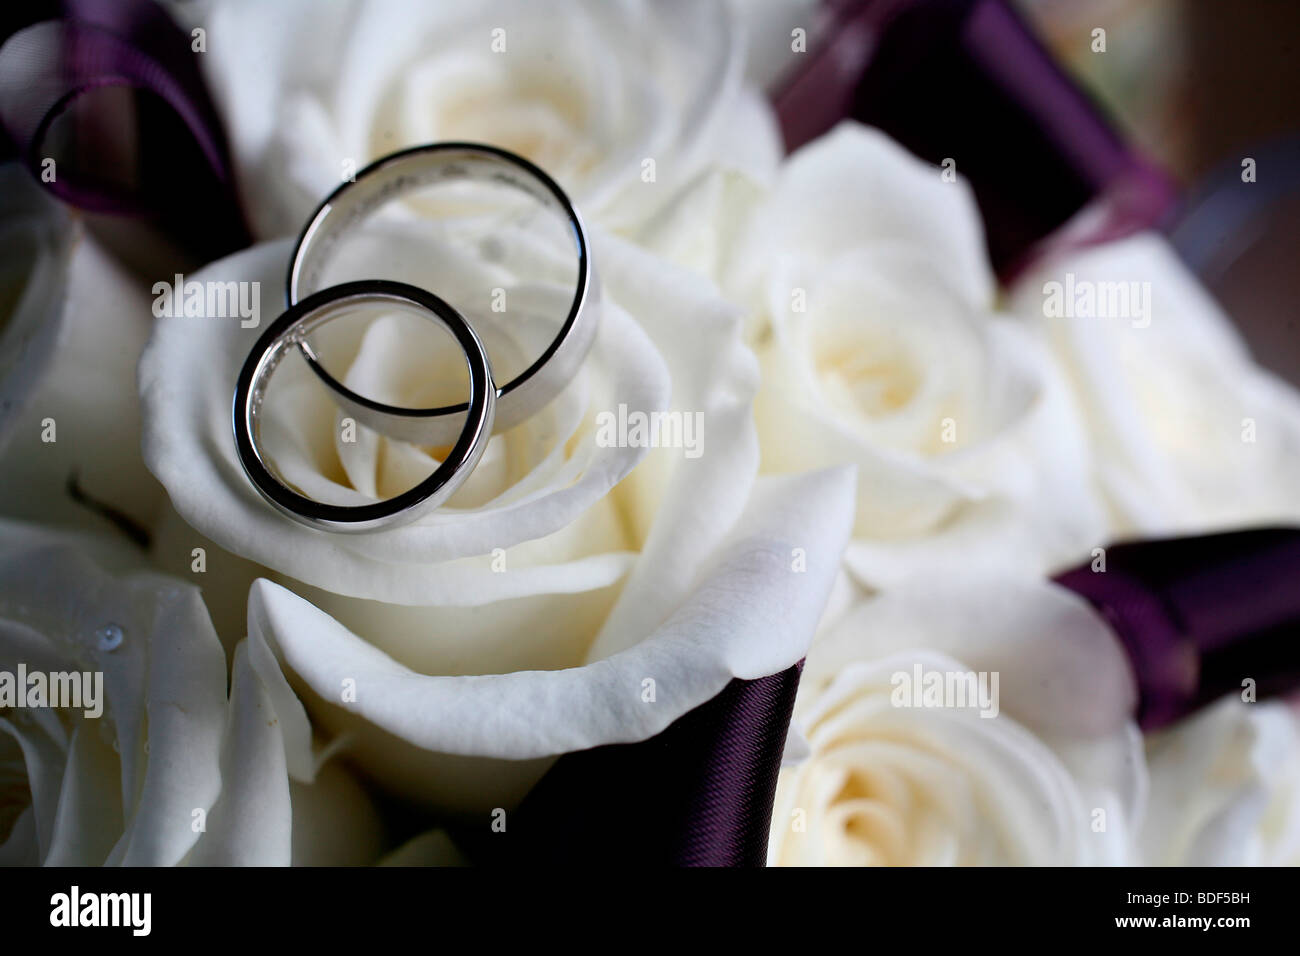 Picture By Mark Passmore 21 08 2009 A Generic Image Of Wedding Rings Placed Upon White Roses Stock Photo Alamy